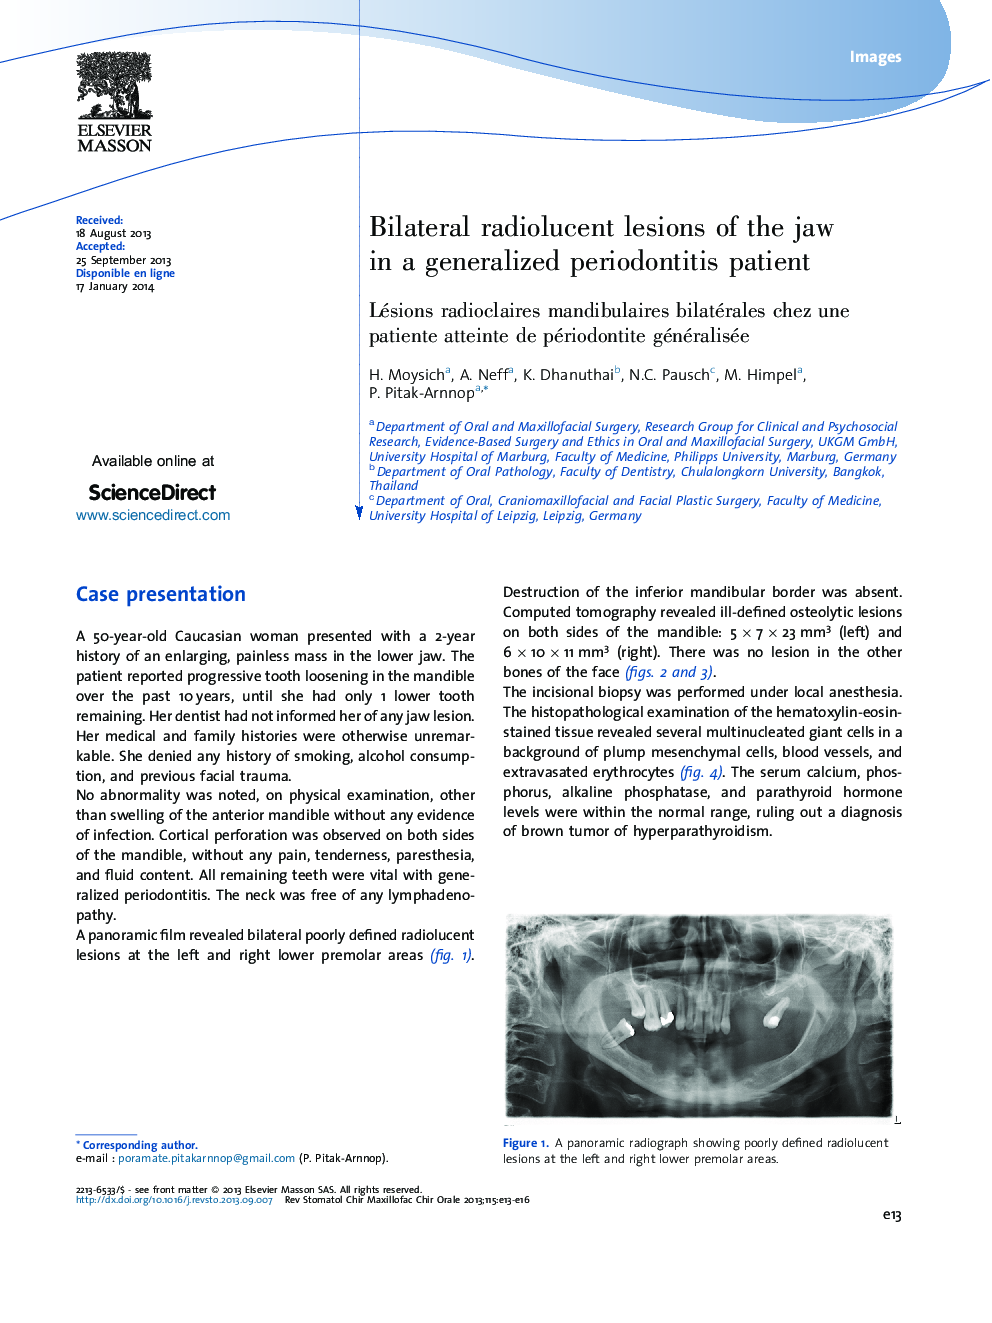 Bilateral radiolucent lesions of the jaw in a generalized periodontitis patient